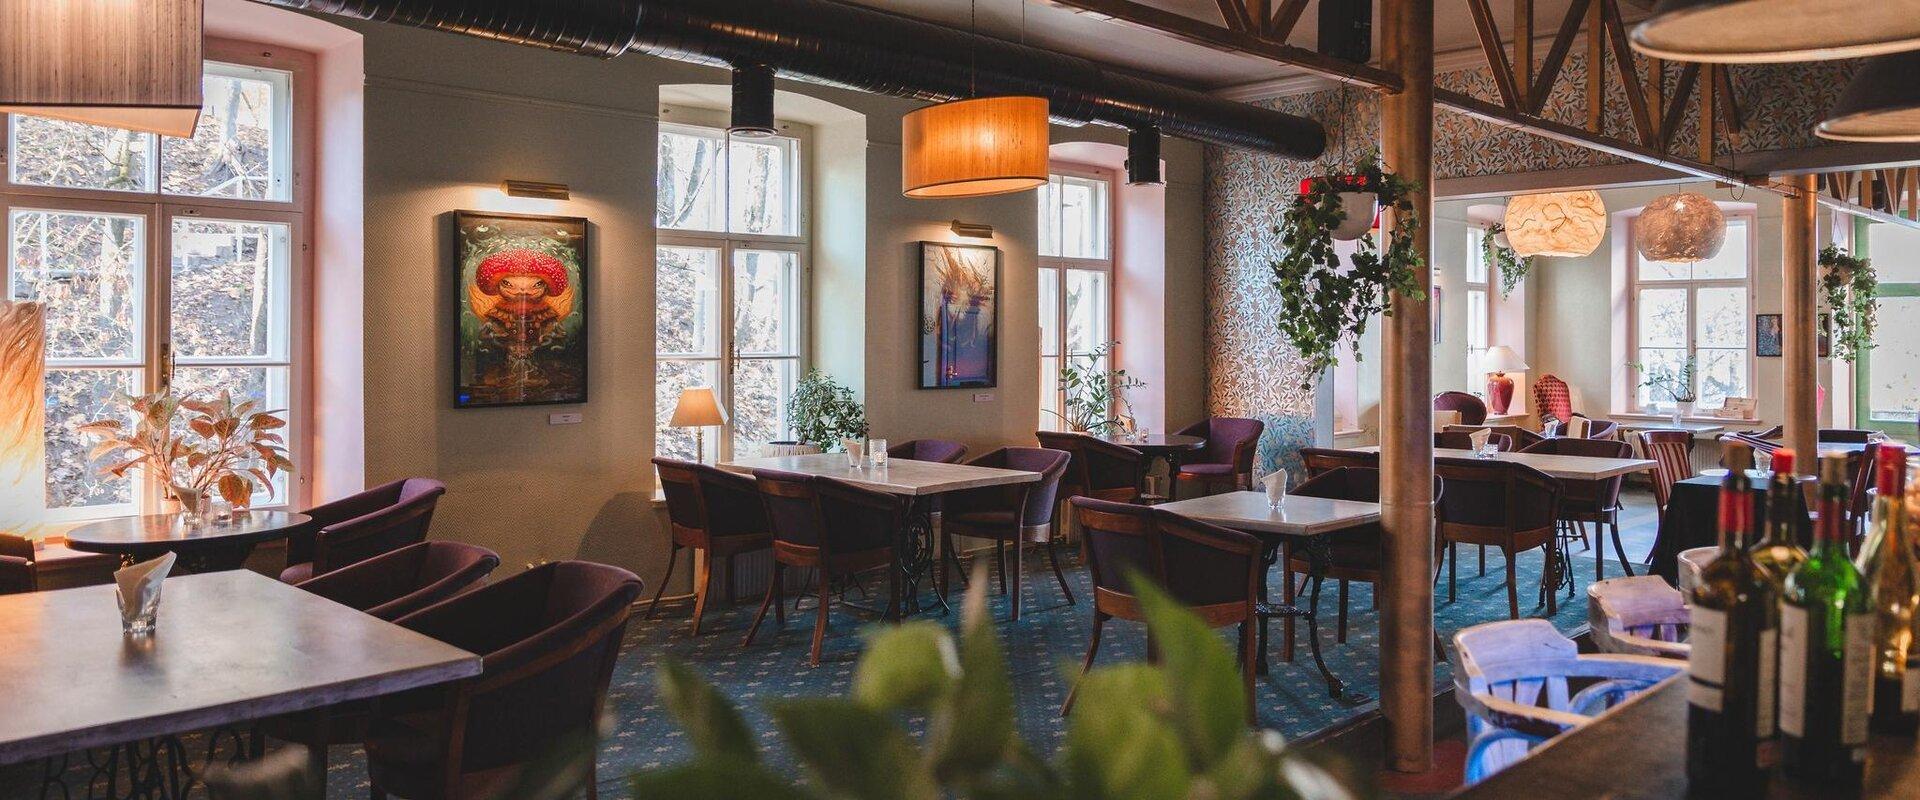 Welcome to restaurant Vilde ja Vine! The restaurant is located in an old brick printing house and combines the finer things in life. Here, art, wine, 